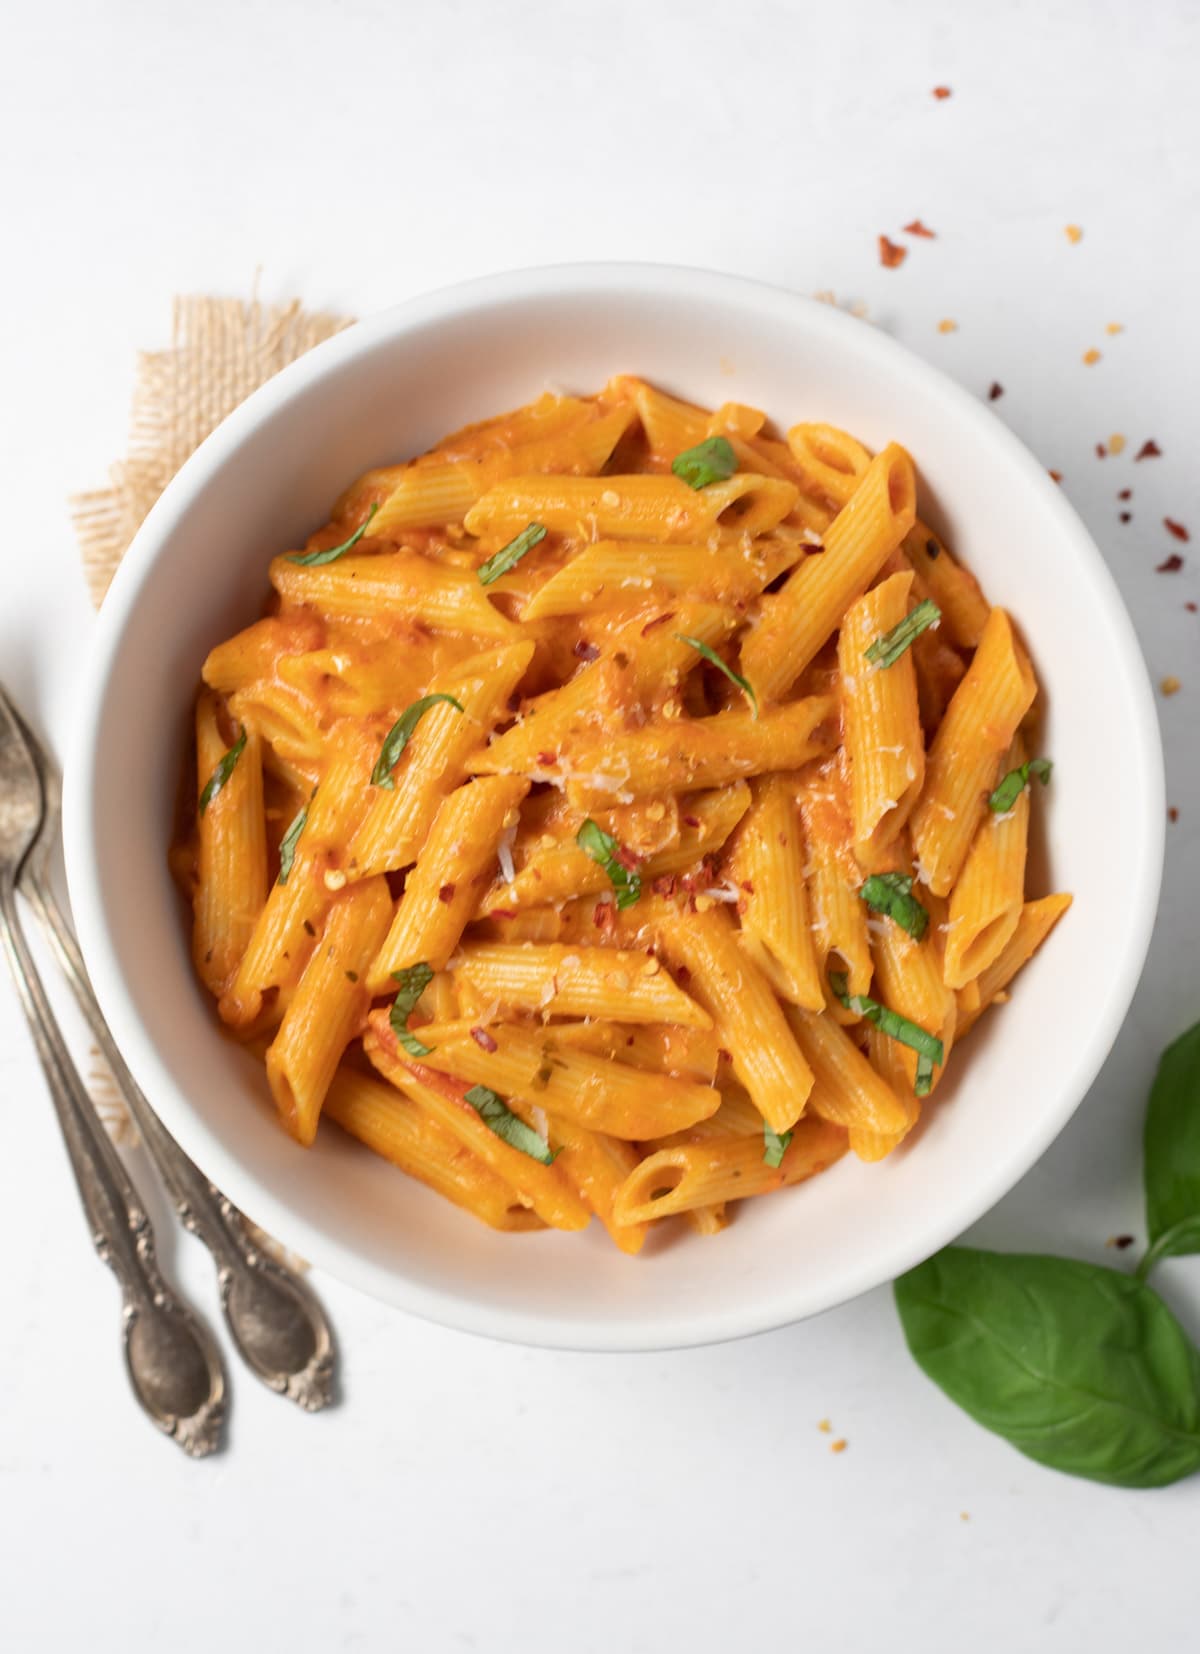 Food with Friends: Penne Alla Vodka Pizza